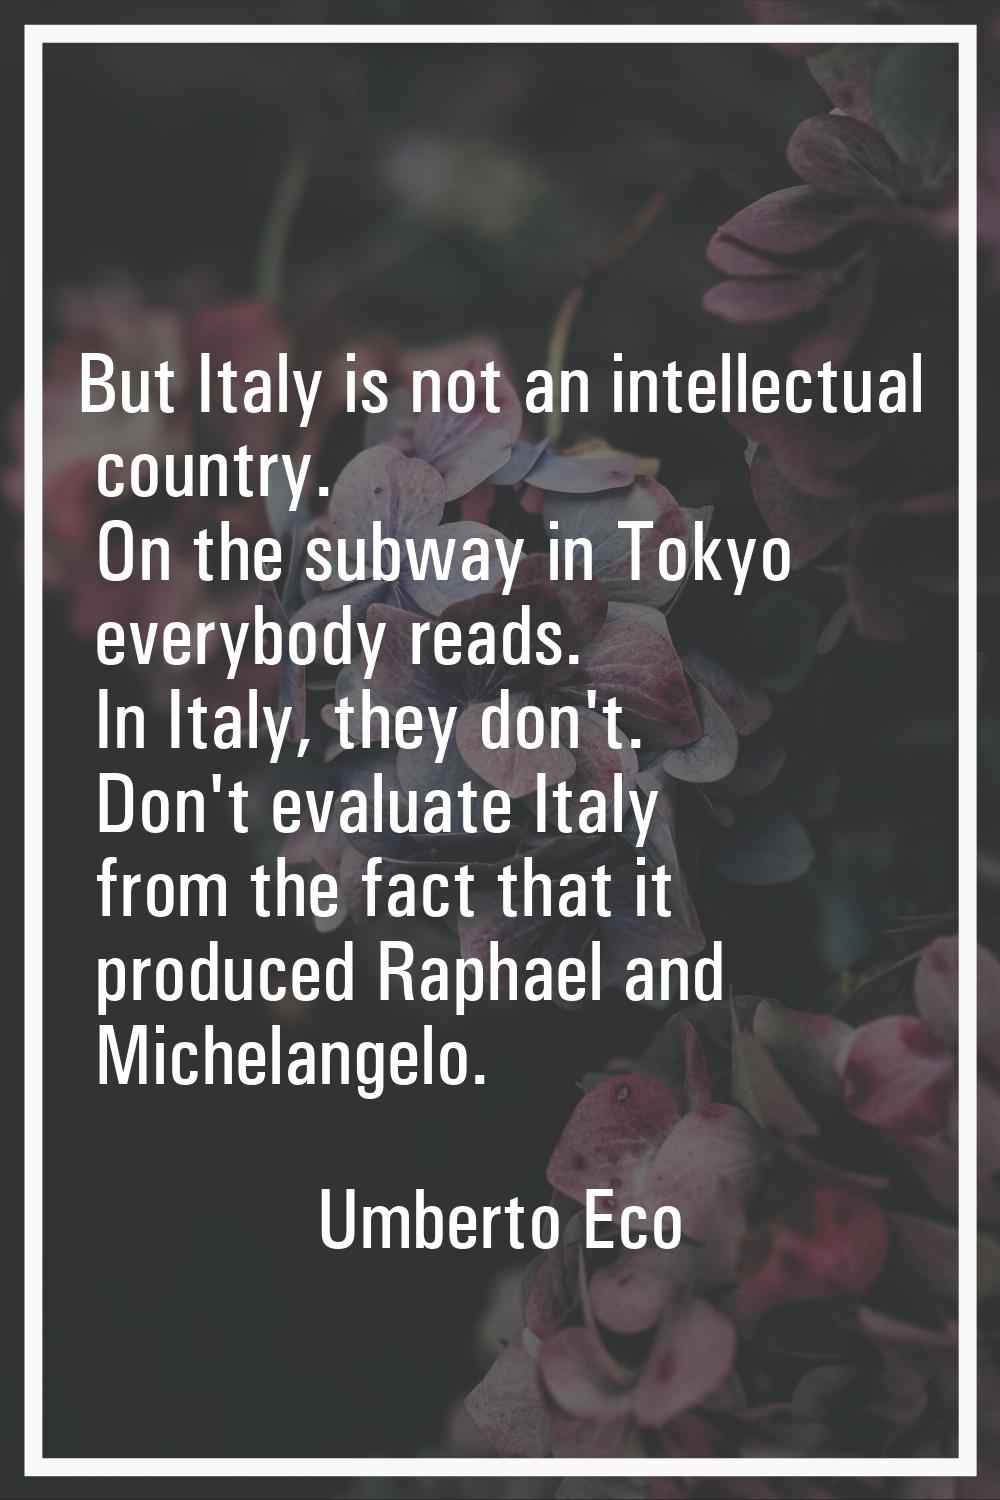 But Italy is not an intellectual country. On the subway in Tokyo everybody reads. In Italy, they do